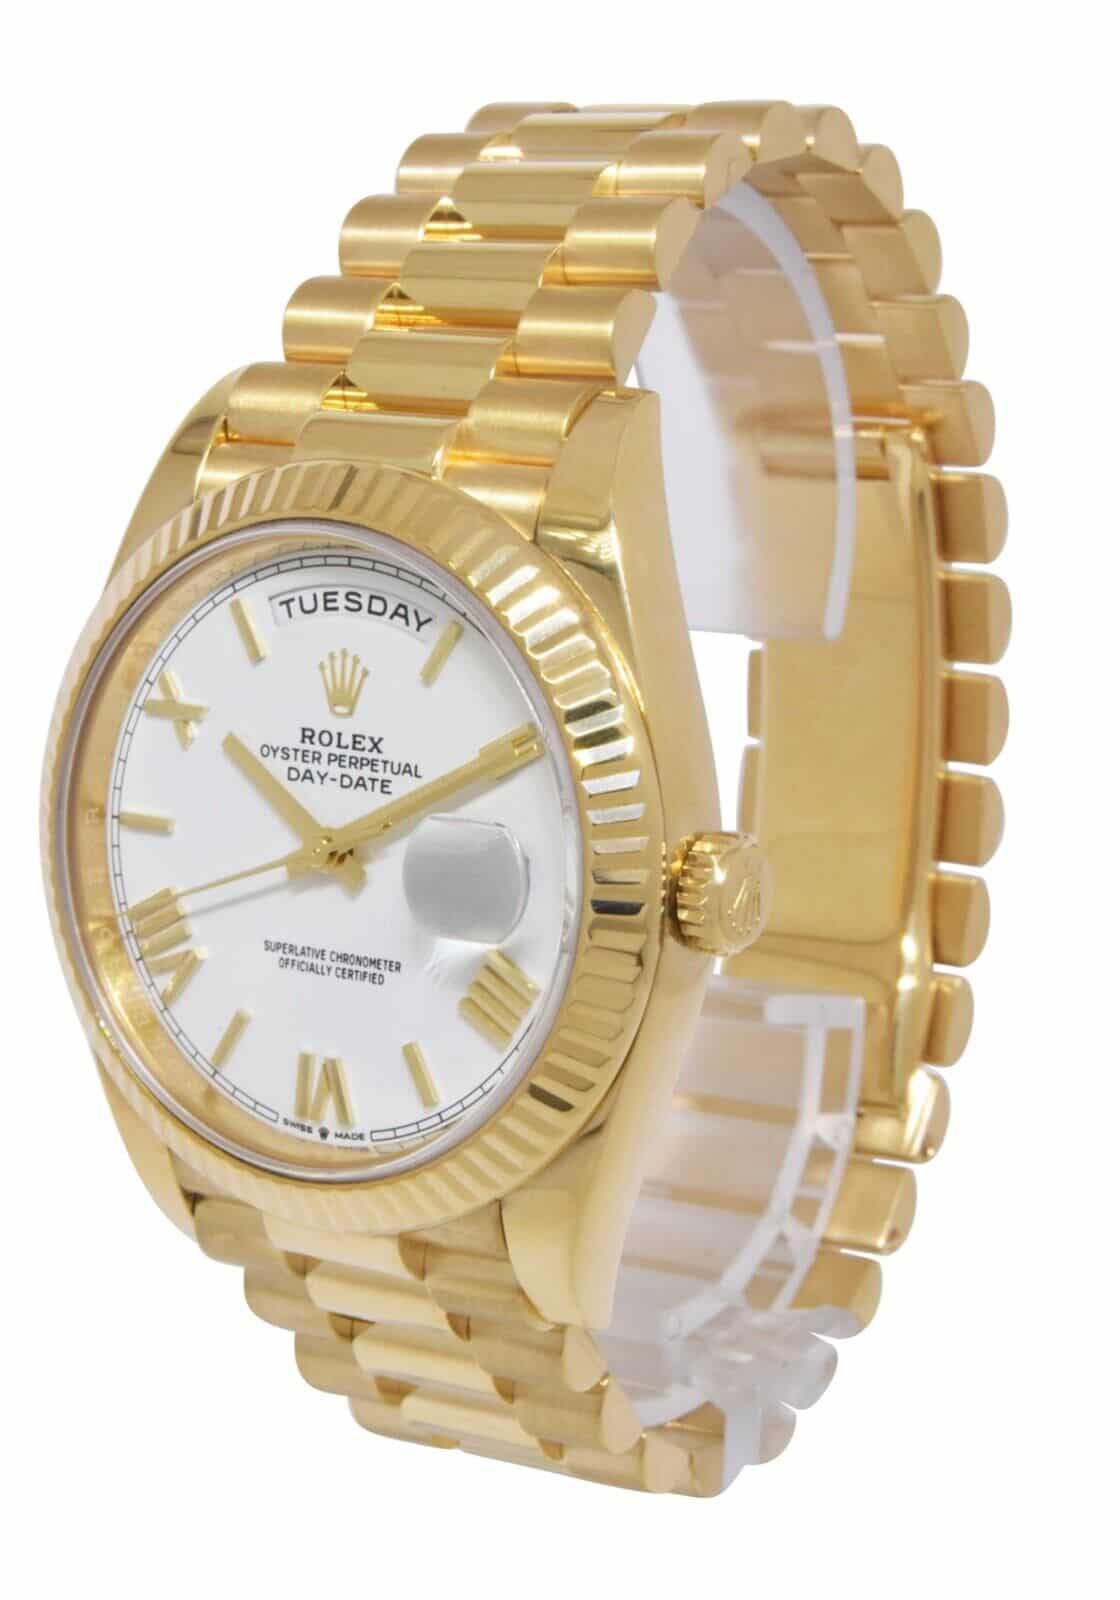 NOS Rolex Day-Date 40 President 18k Yellow Gold White Dial Watch B/P '21 228238